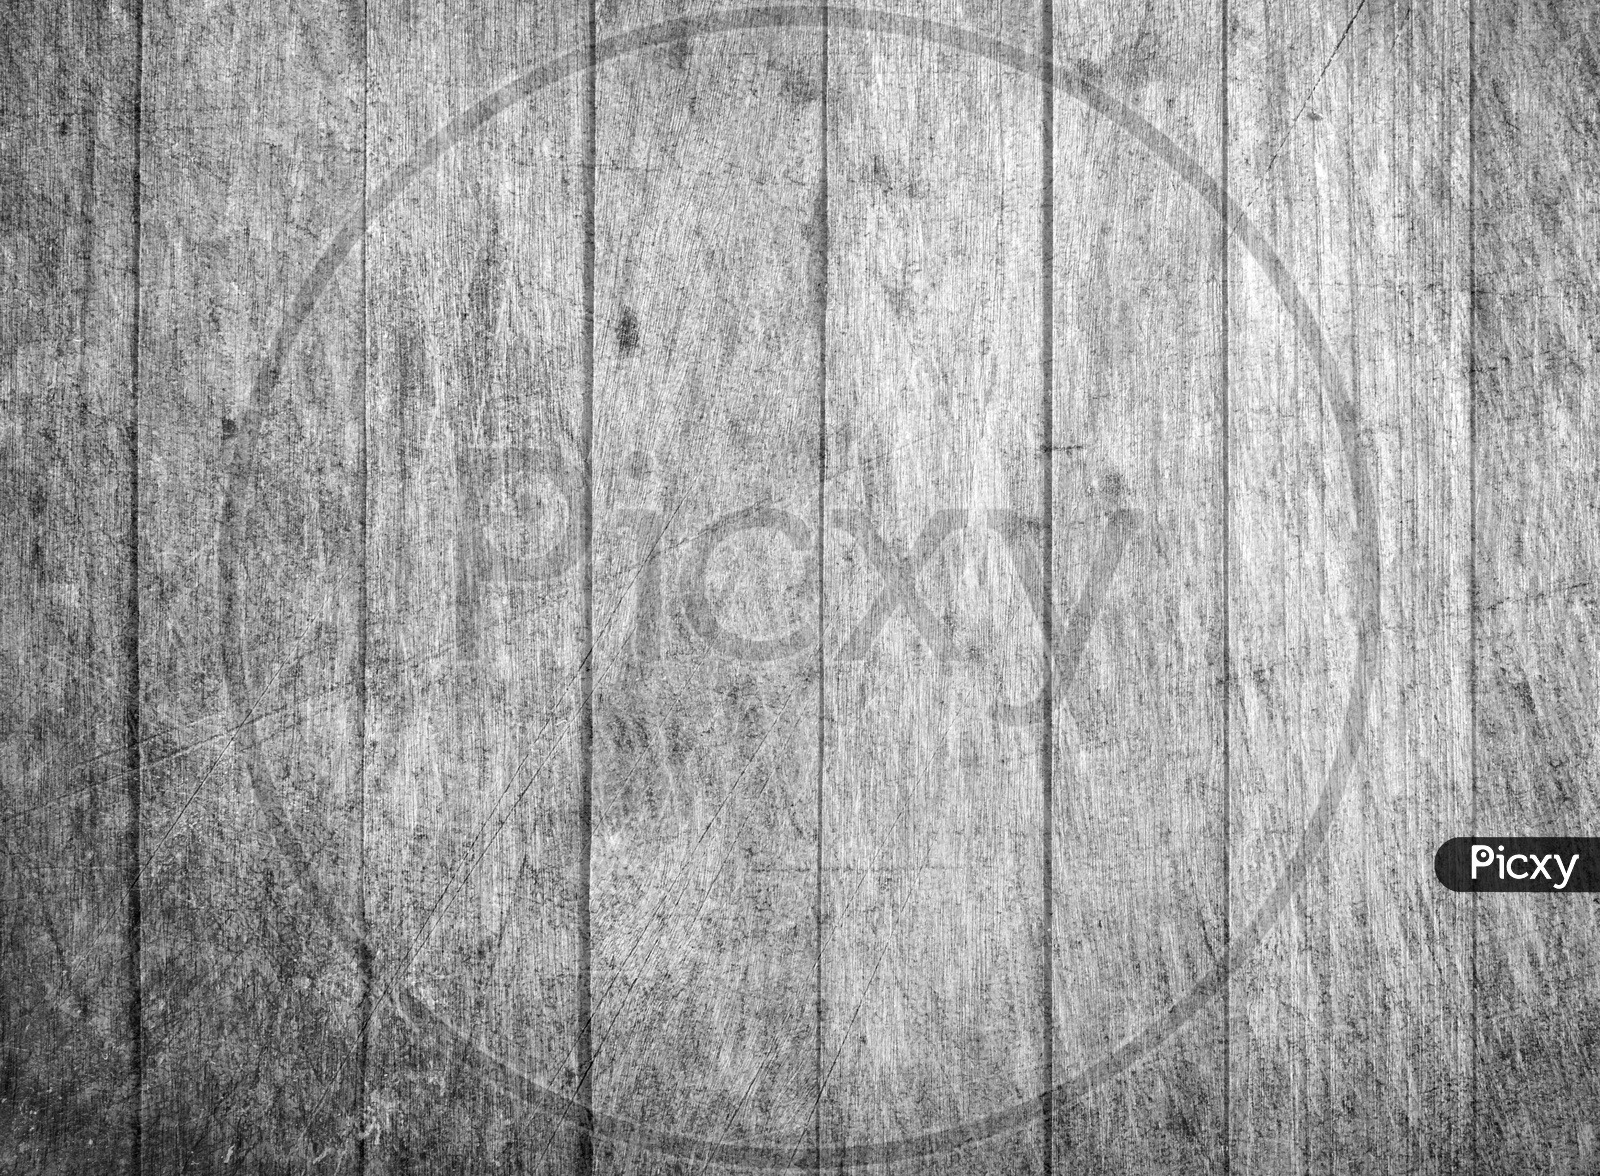 Wood plank texture background in black and white